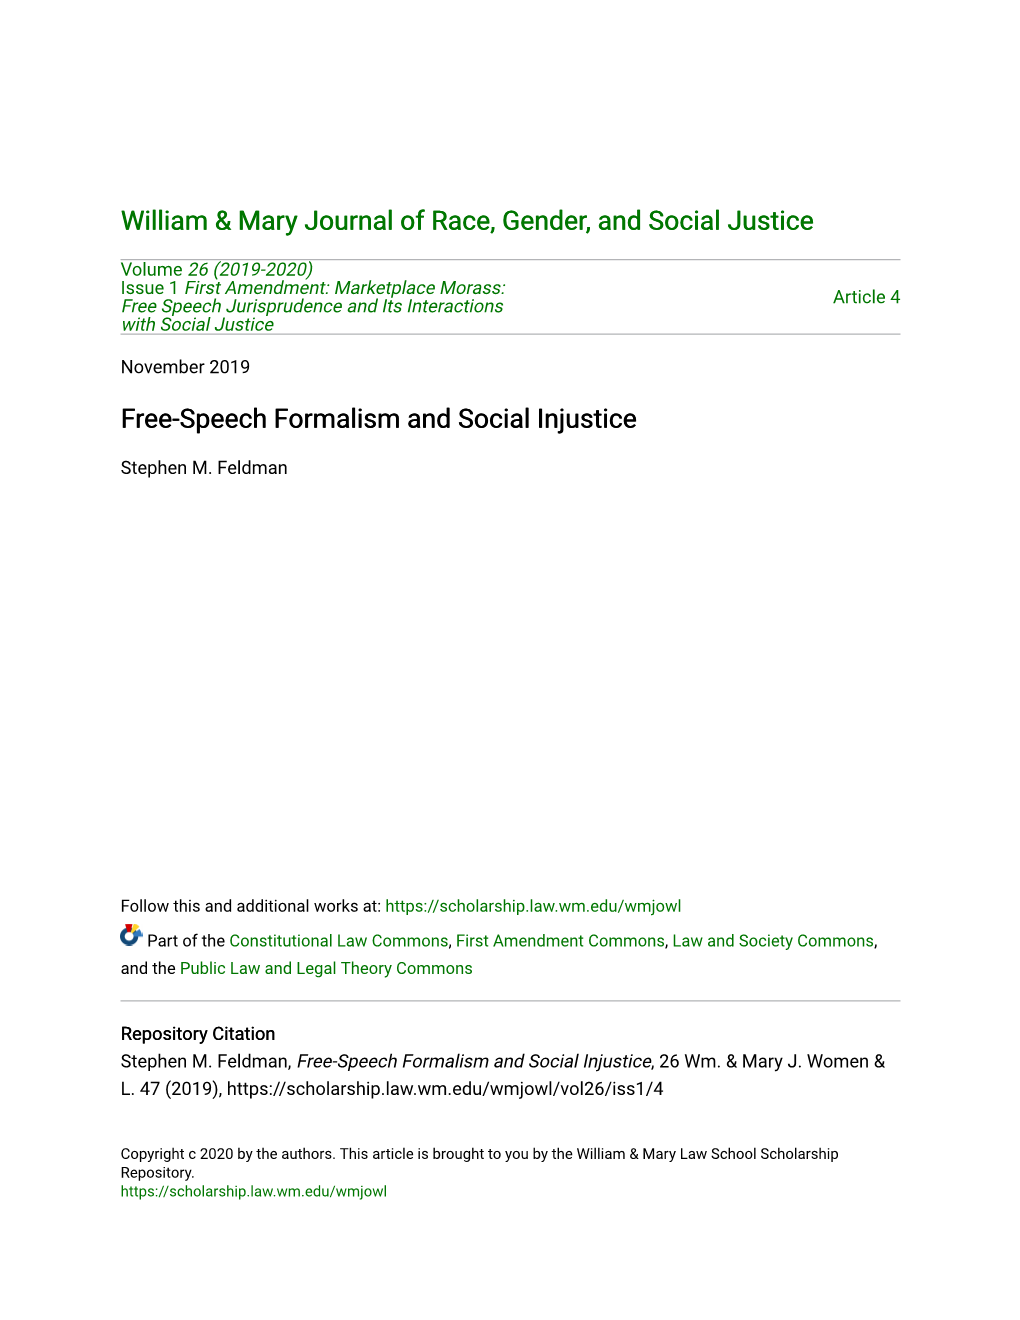 Free-Speech Formalism and Social Injustice